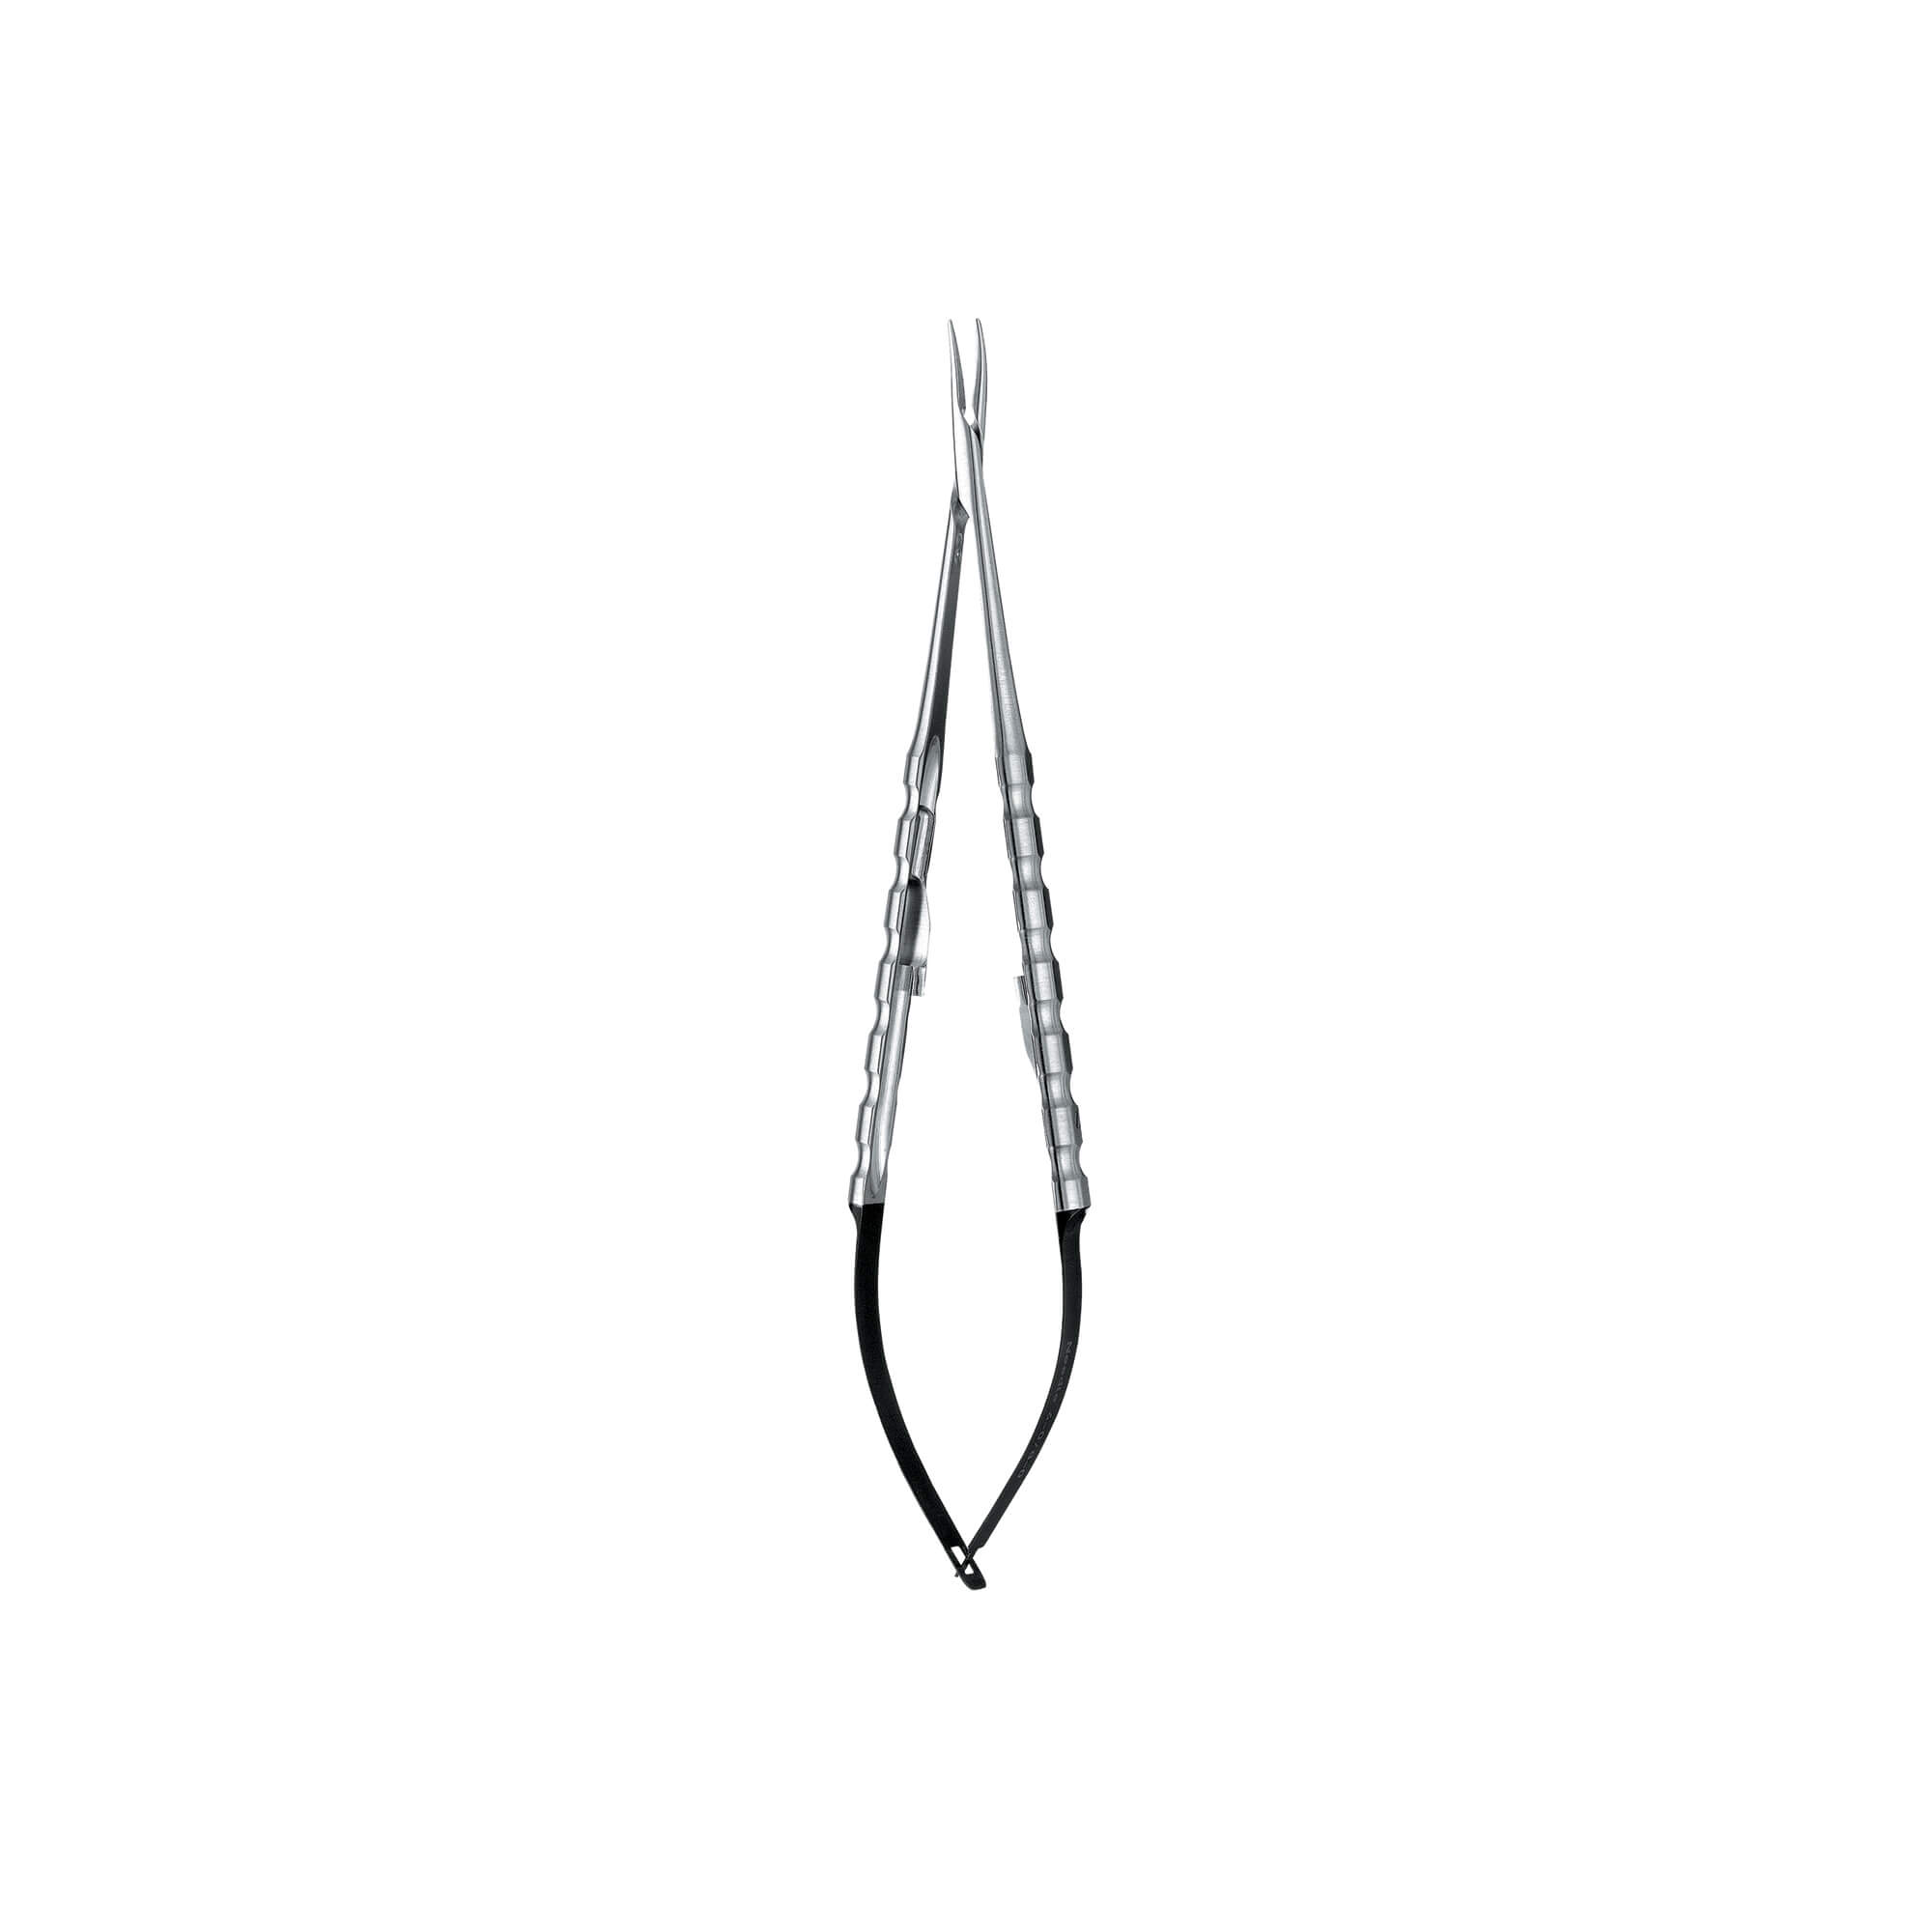 Microsurgical Curved Castro Needle Holder, Diamond Dusted, 18 cm